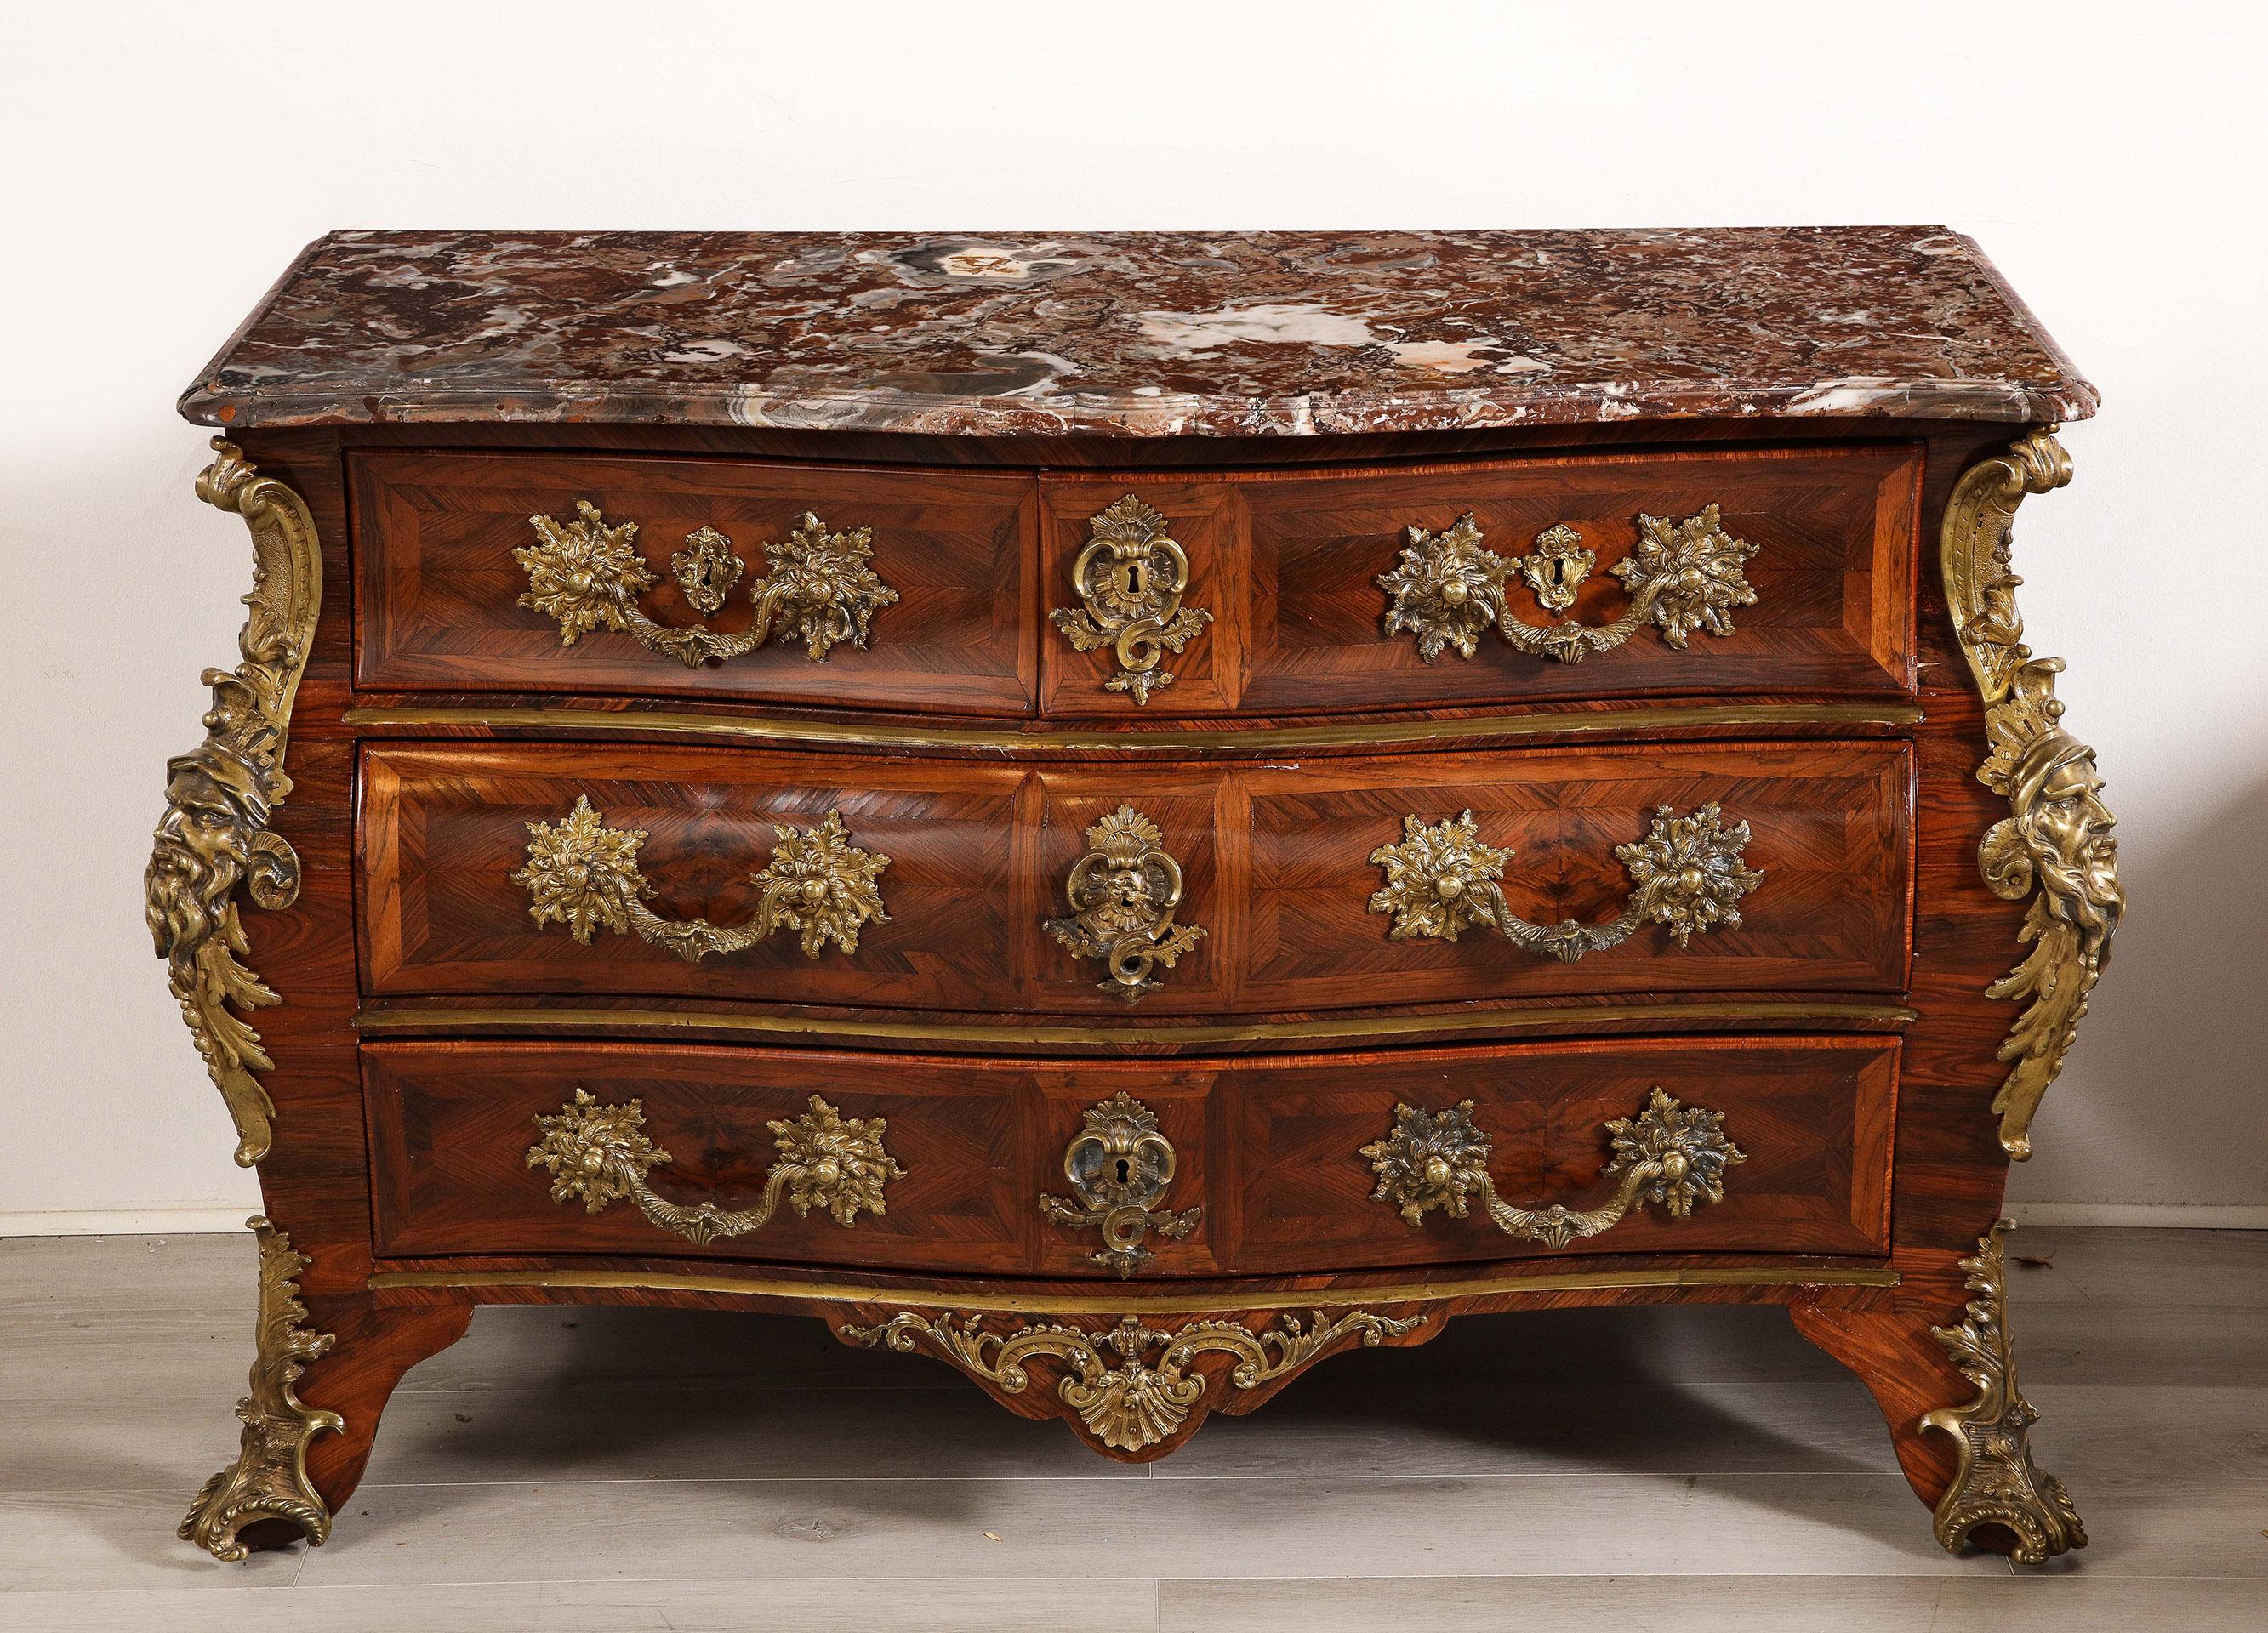 The shaped brèche d'Alep marble top, above a bombé form body with two short and two long drawers spaced with brass insets and with bronze pulls, the corners mounted with bronze Grecian mask escutcheons, on short cabriole legs. 
Stamped M. Criaere.